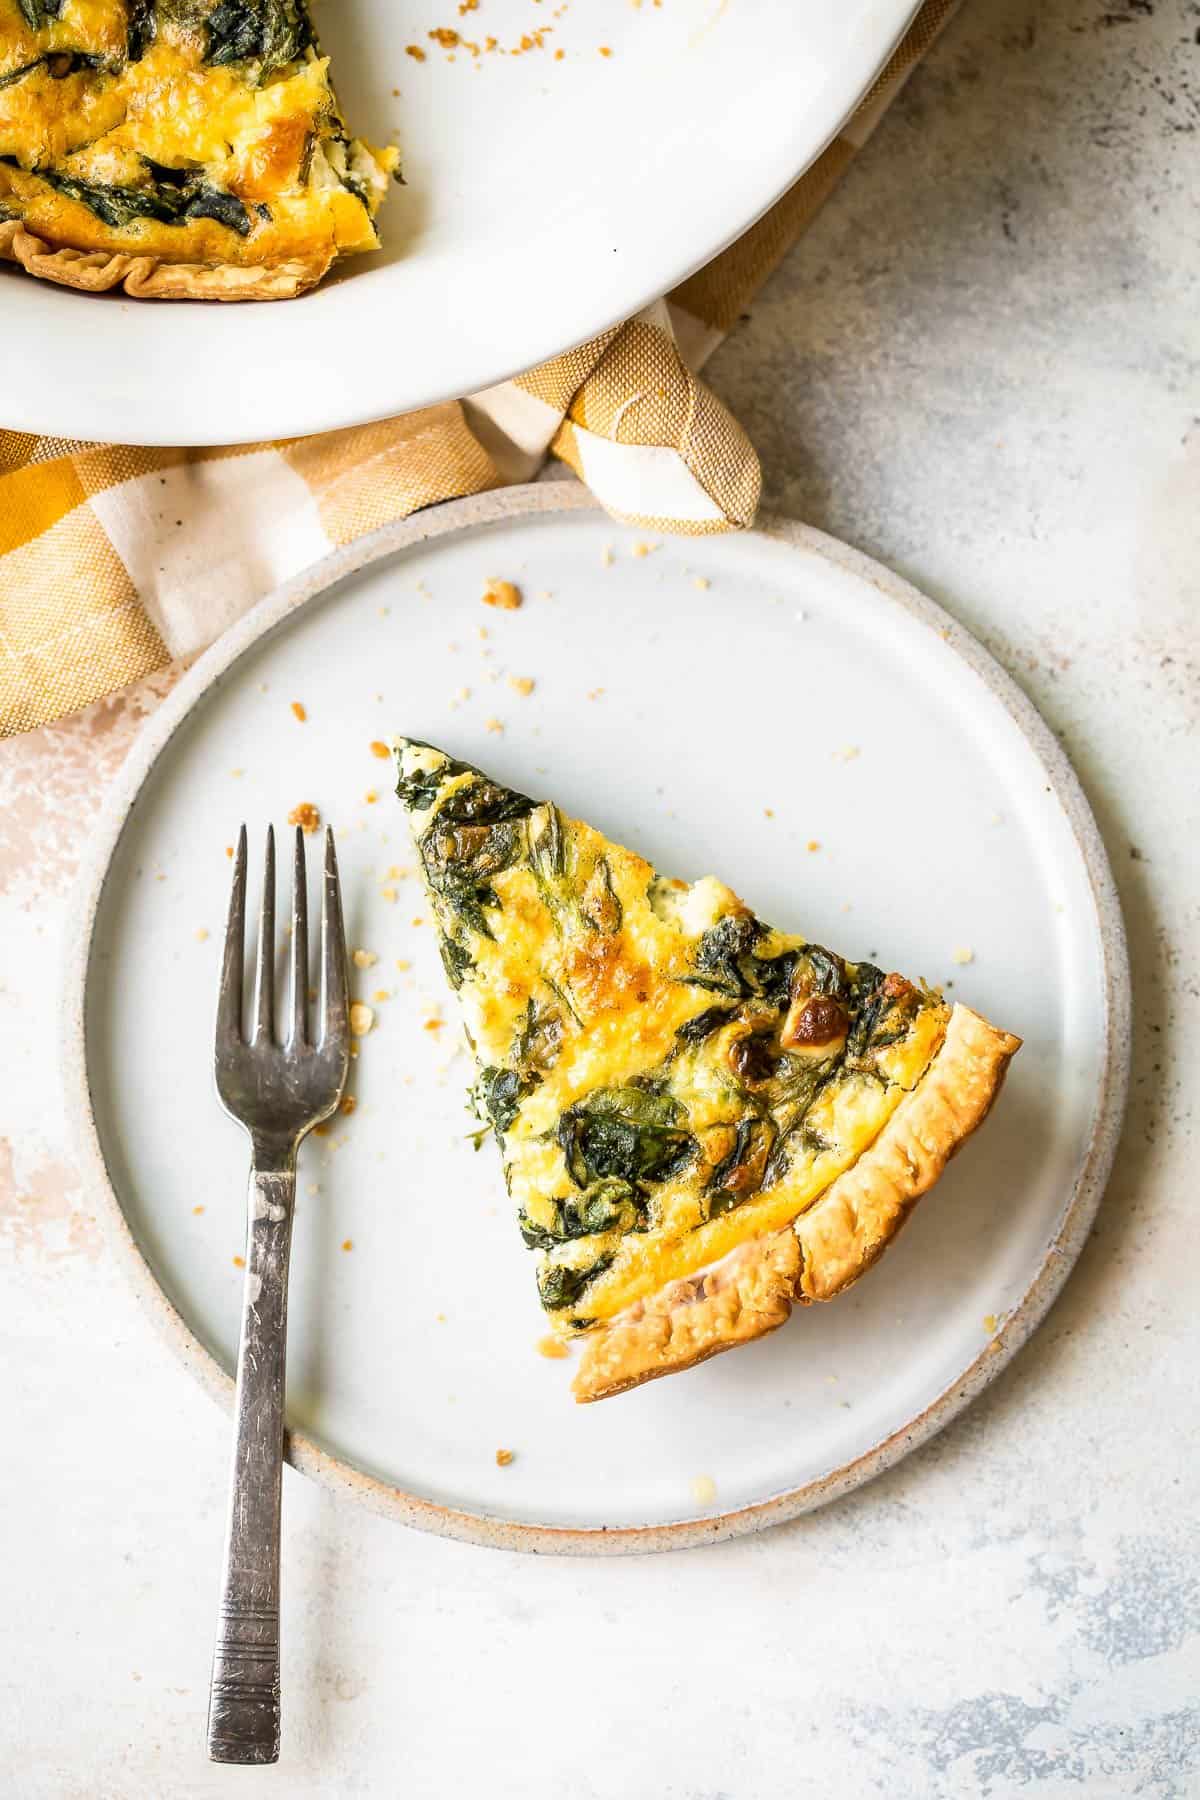 Spinach quiche slice with a fork.